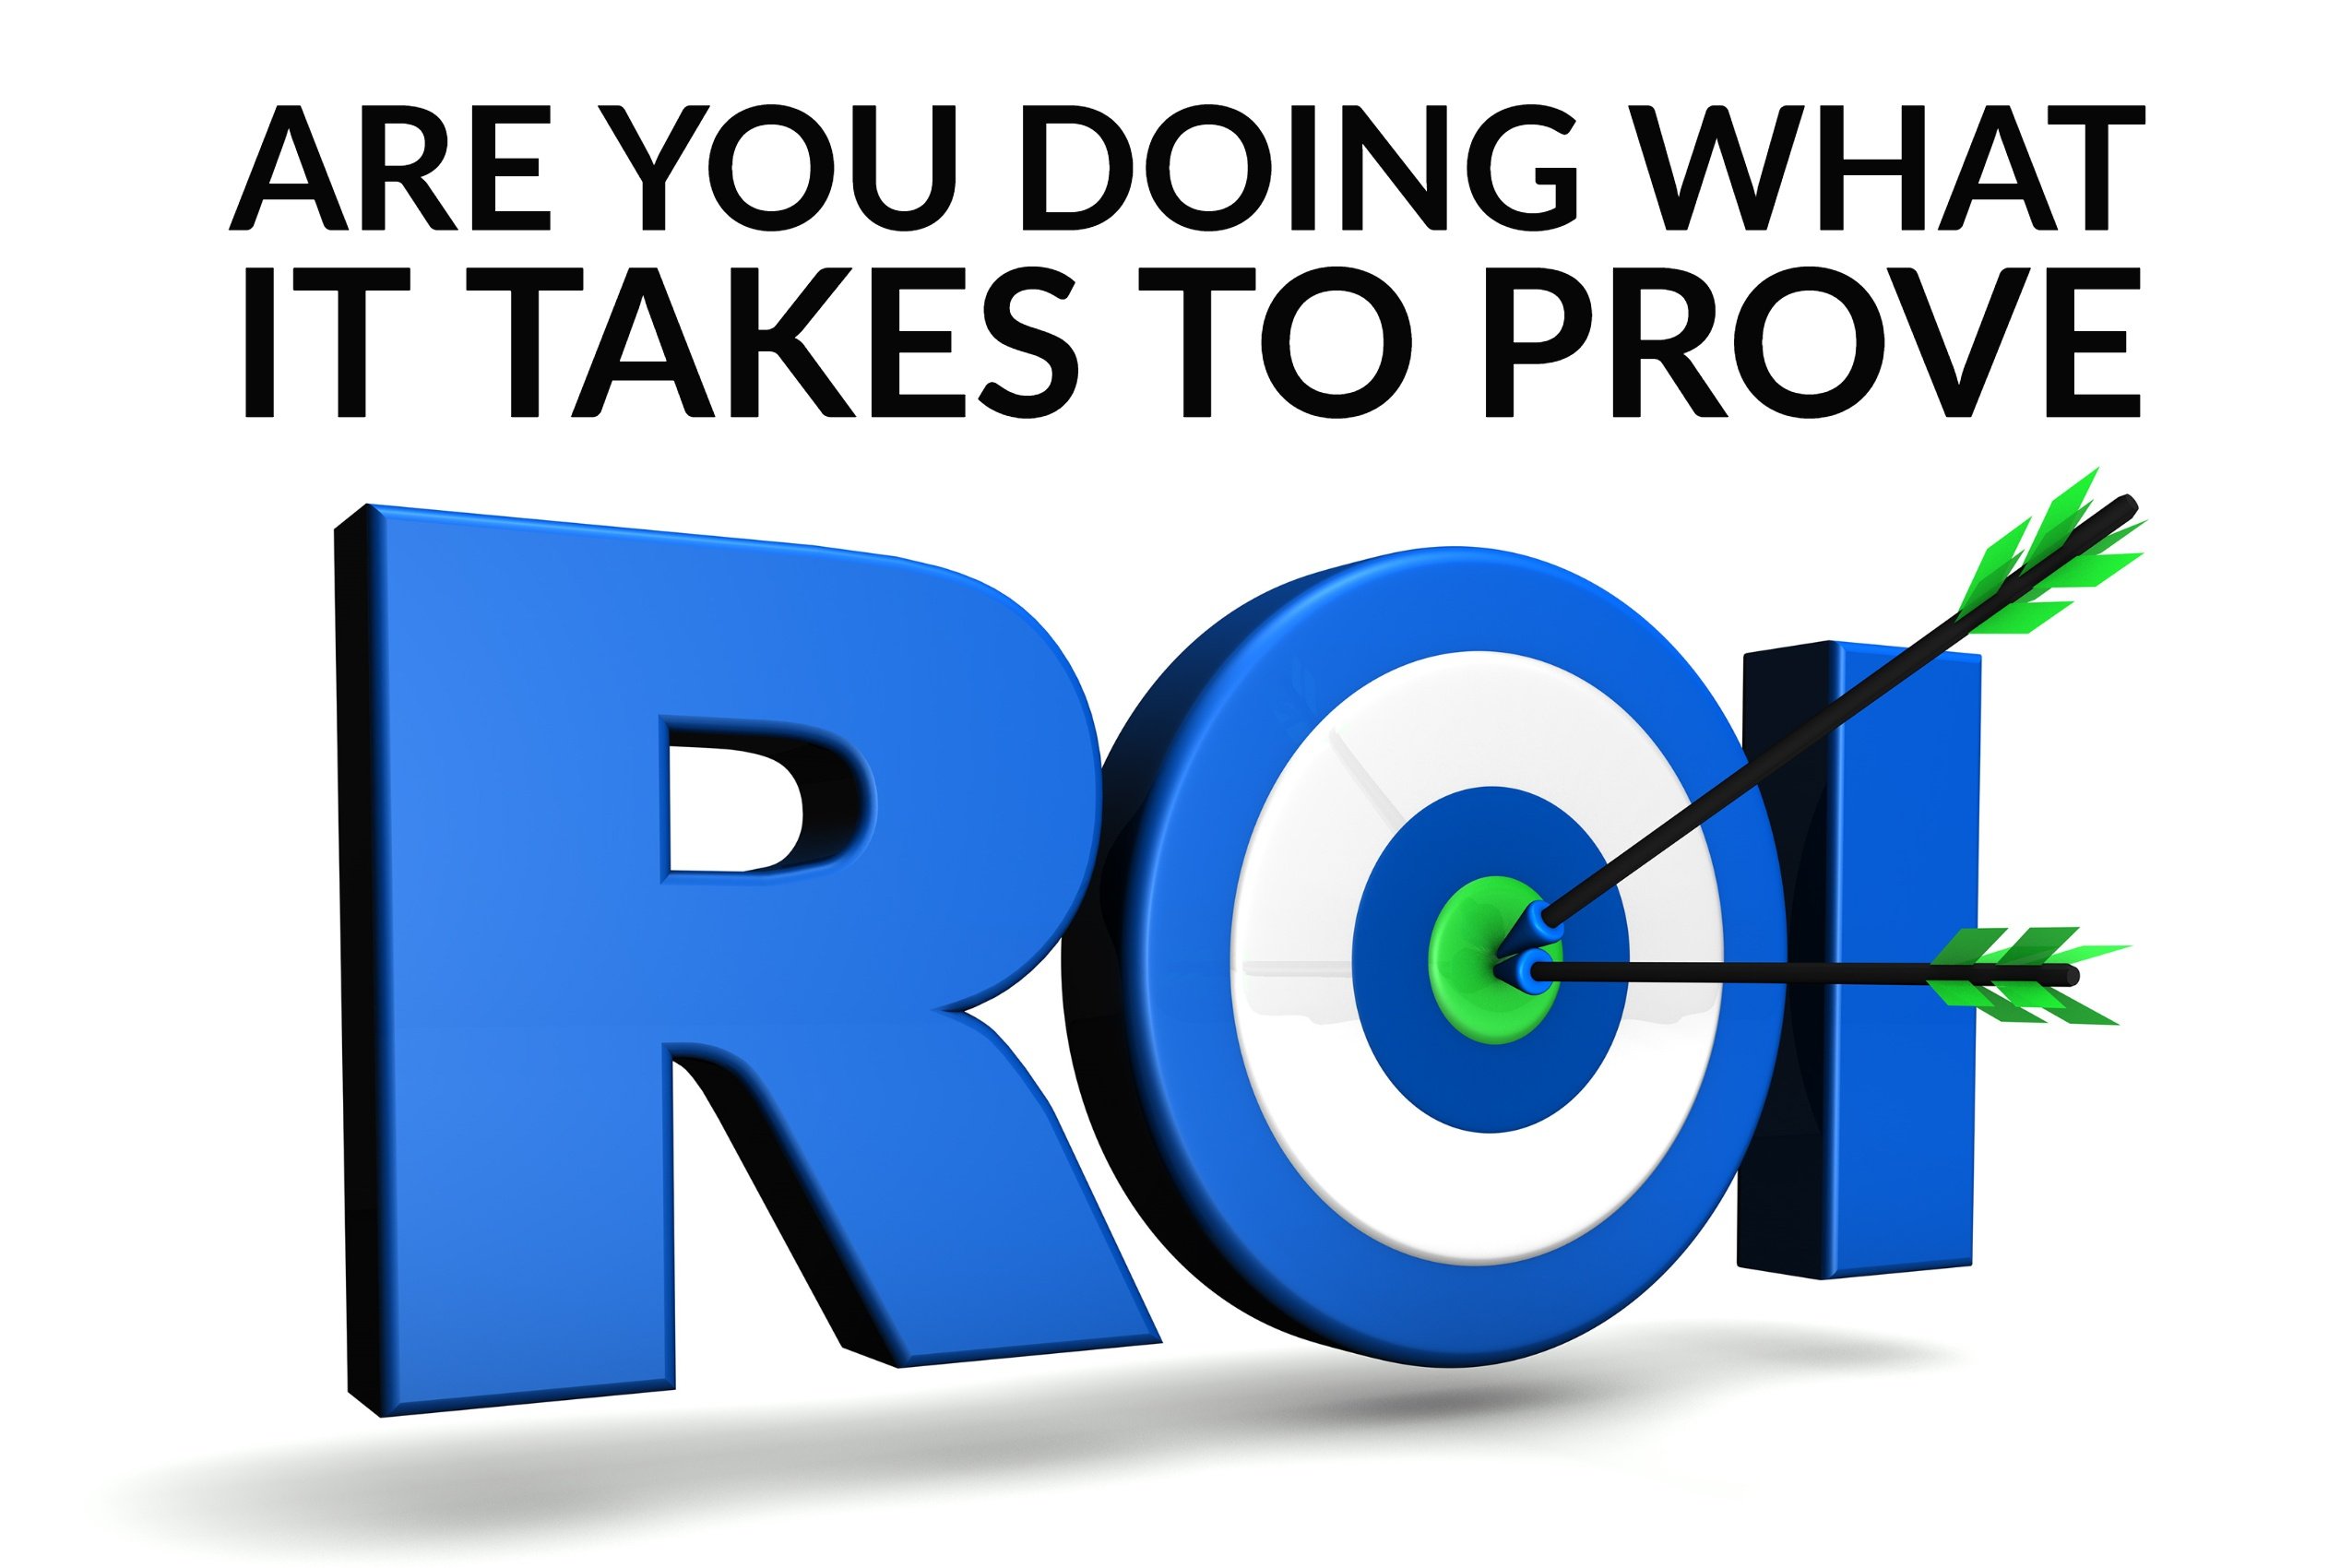 Are You Doing What It Takes To Prove ROI? (infographic)